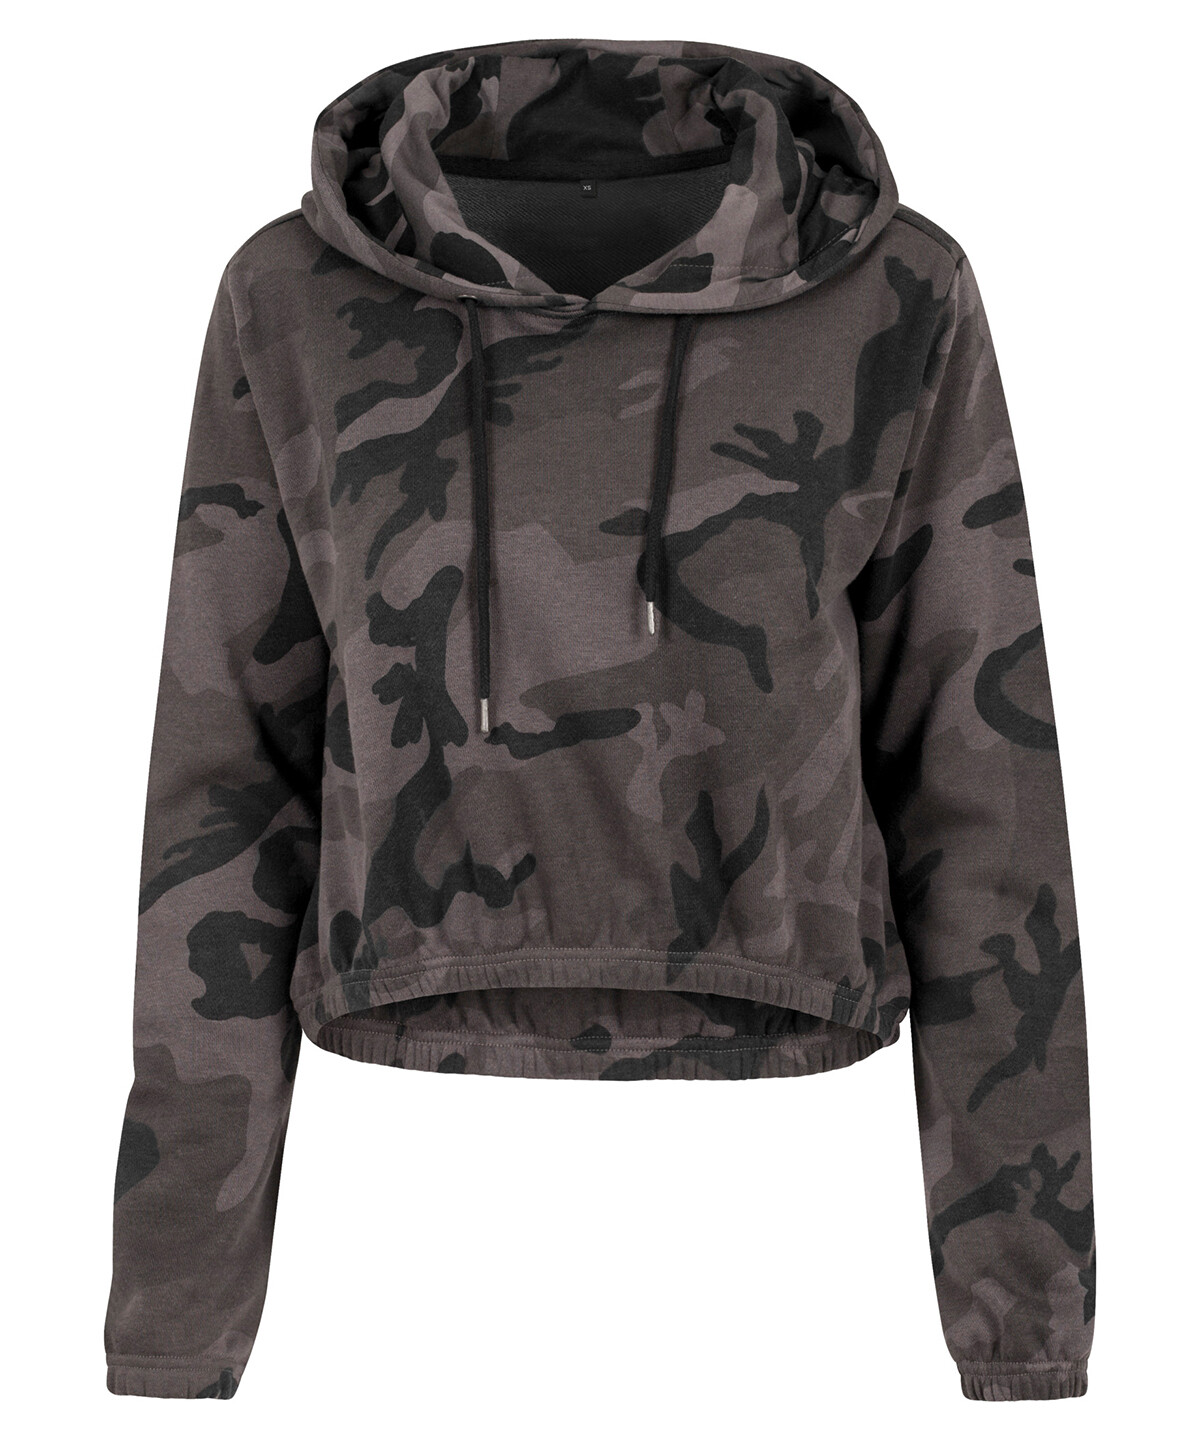 BUILD YOUR BRAND Women's camo cropped hoodie, Color: Camo grey